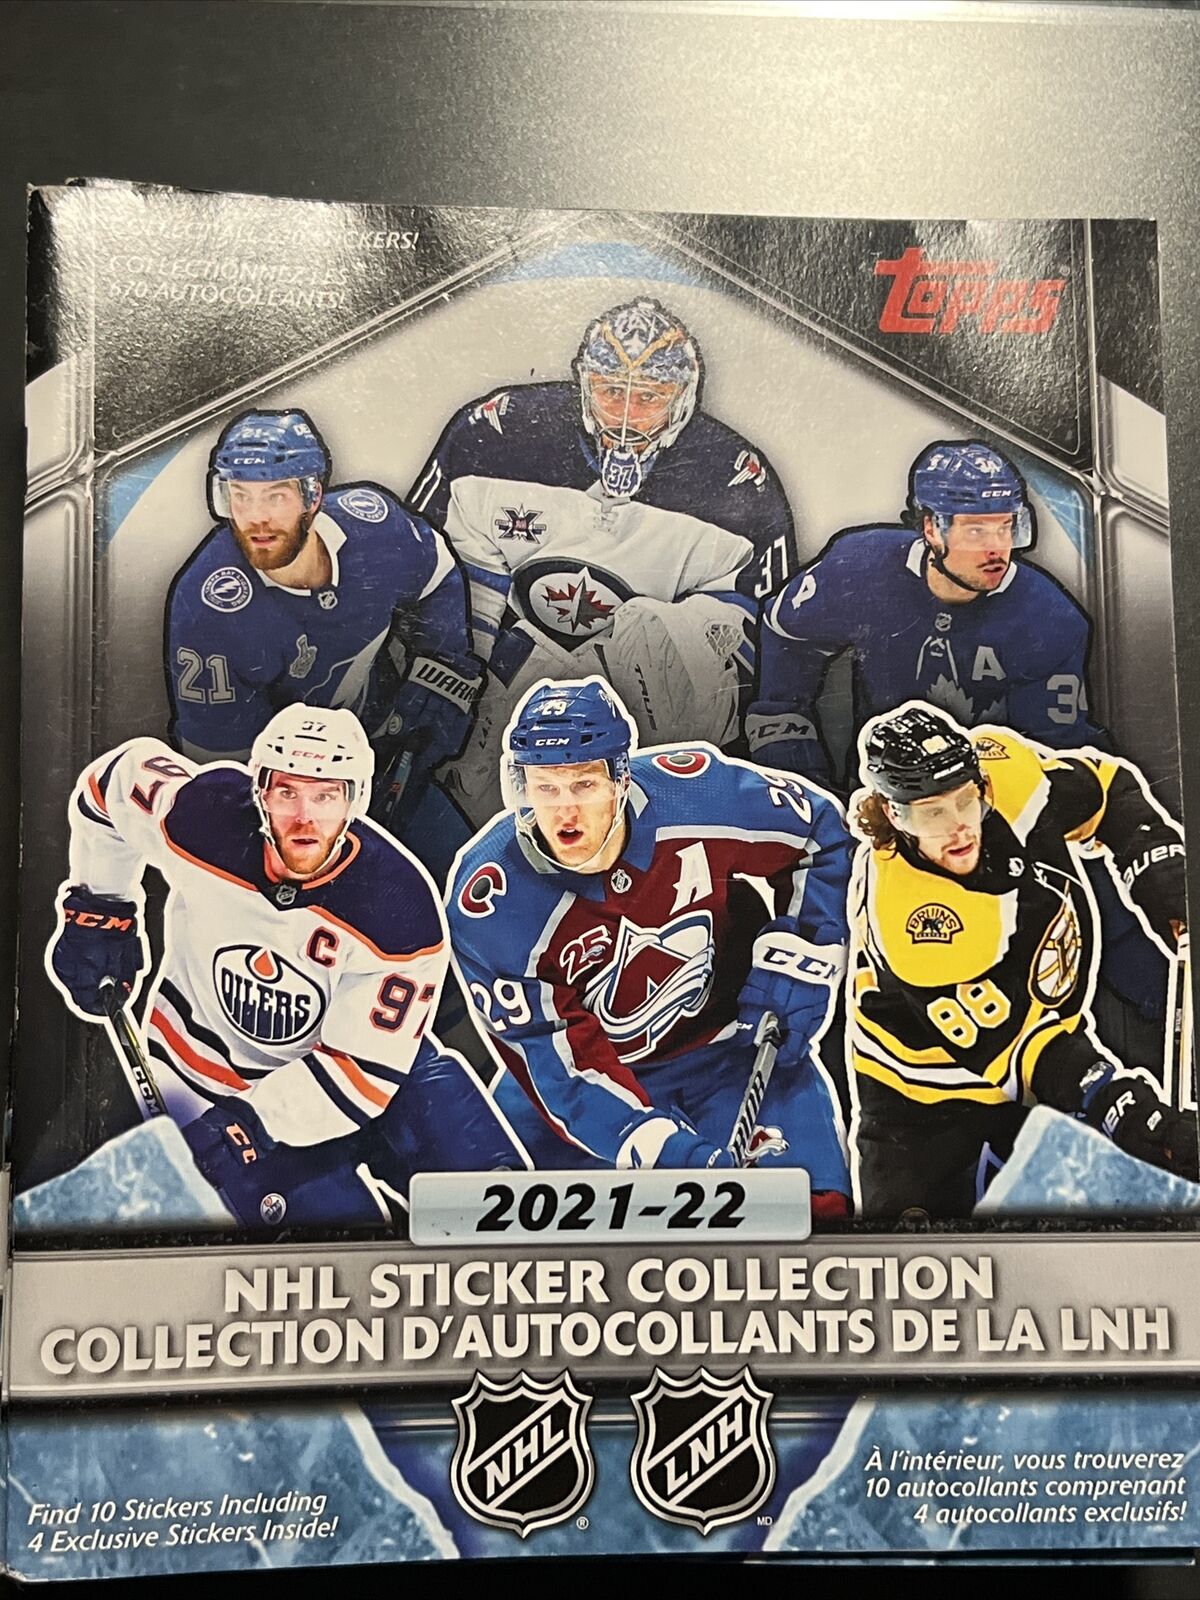 Topps 2021-22 NHL Sticker Collection Album